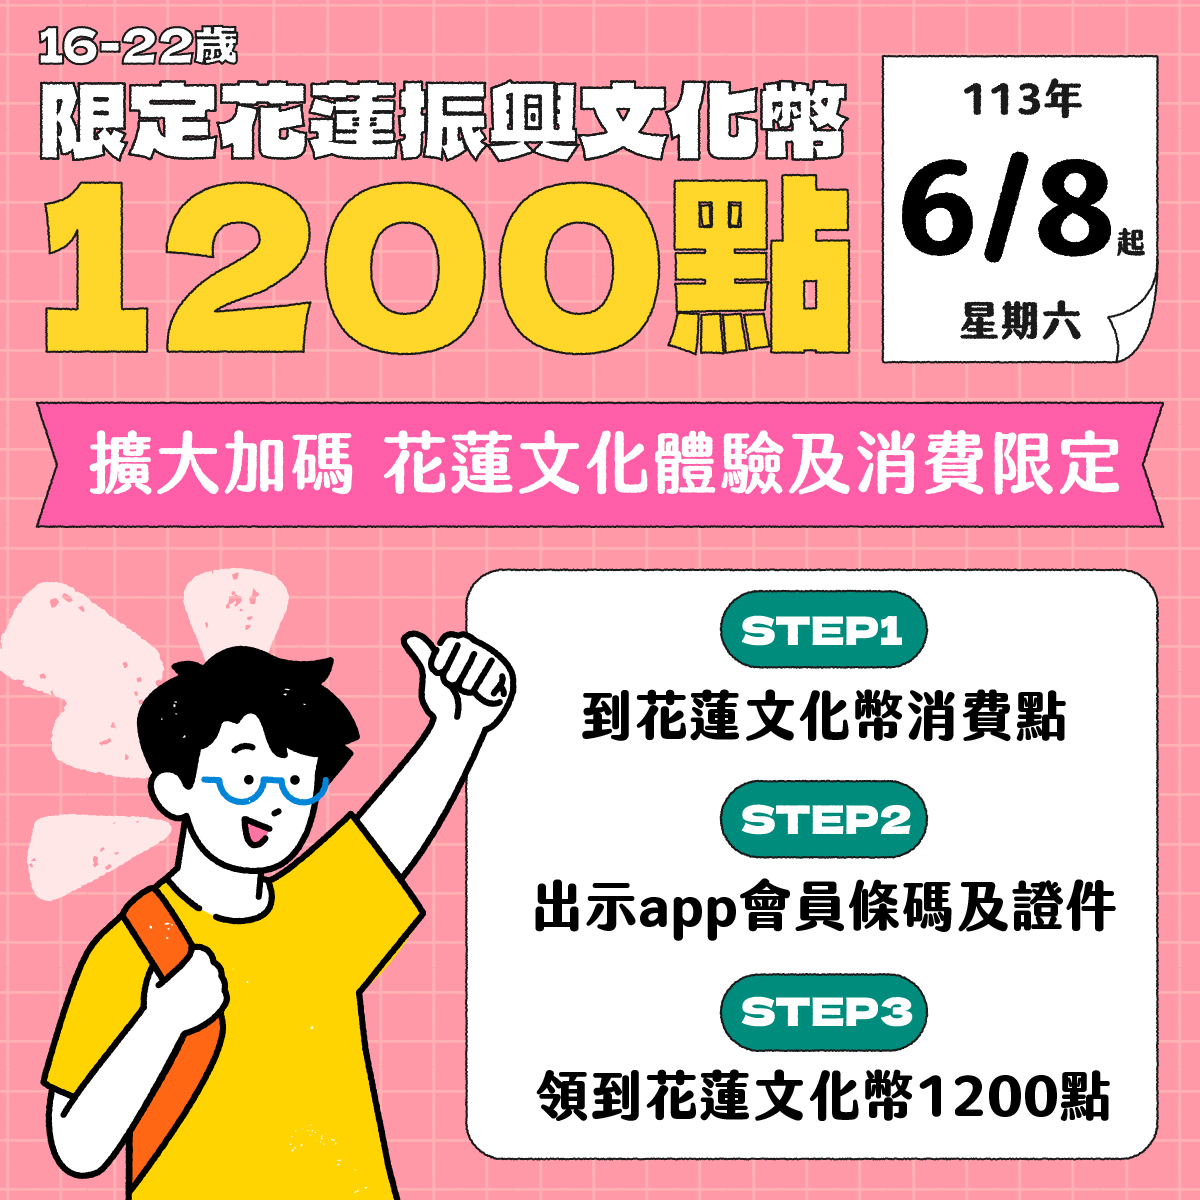 Hualien-exclusive 1200 “Culture Point” cash handout available starting June 8: Culture Ministry